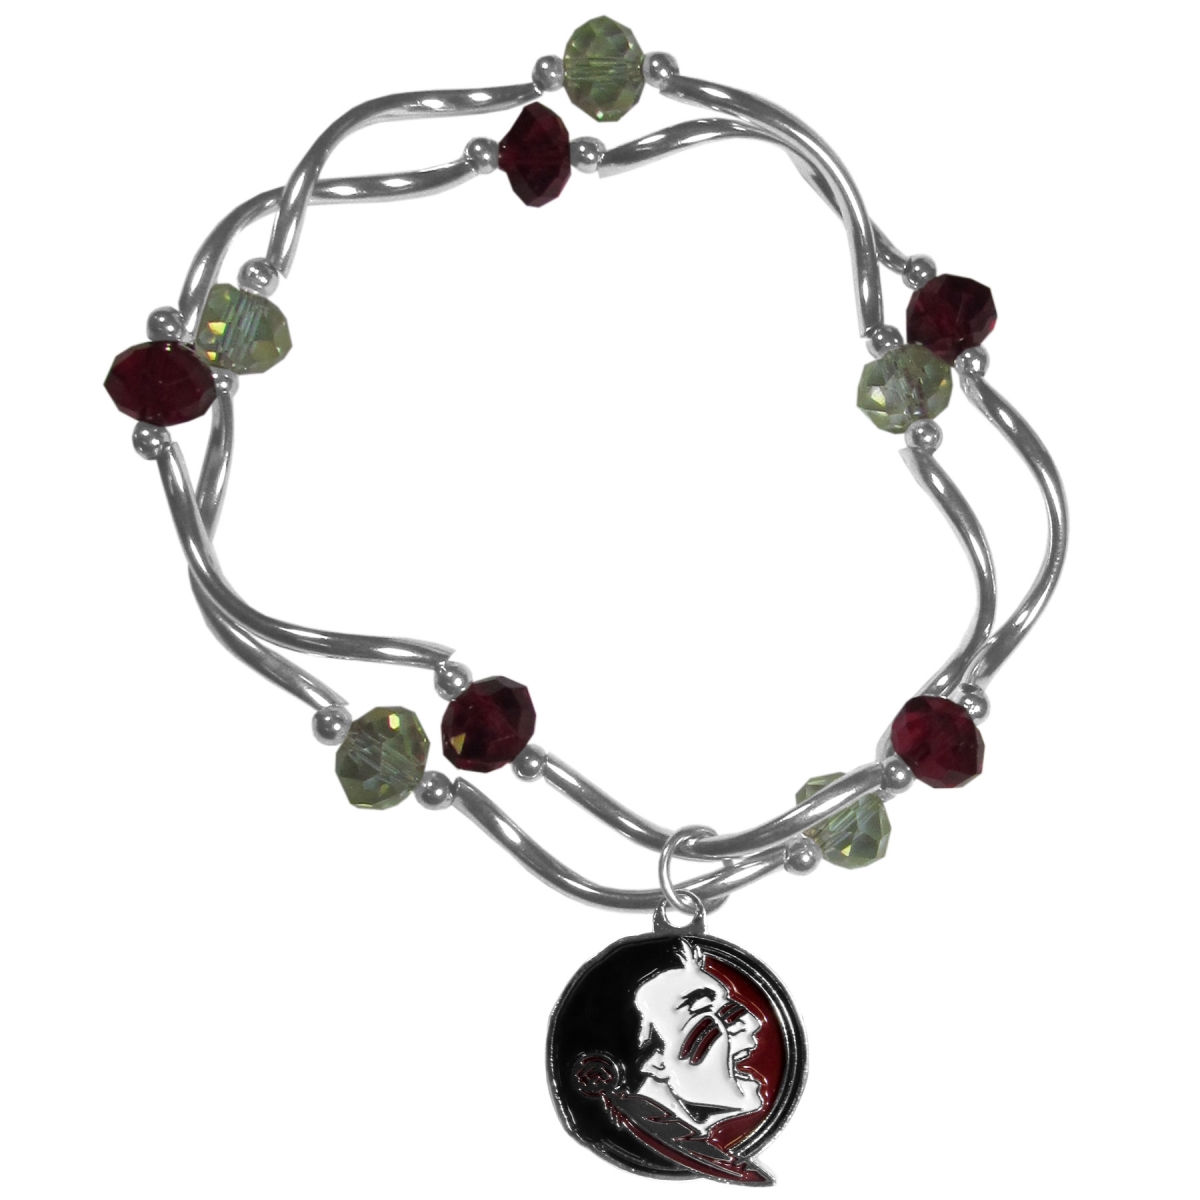 Picture of Siskiyou CCYB7 Female NCAA Florida State Seminoles Crystal Bead Bracelet - One Size